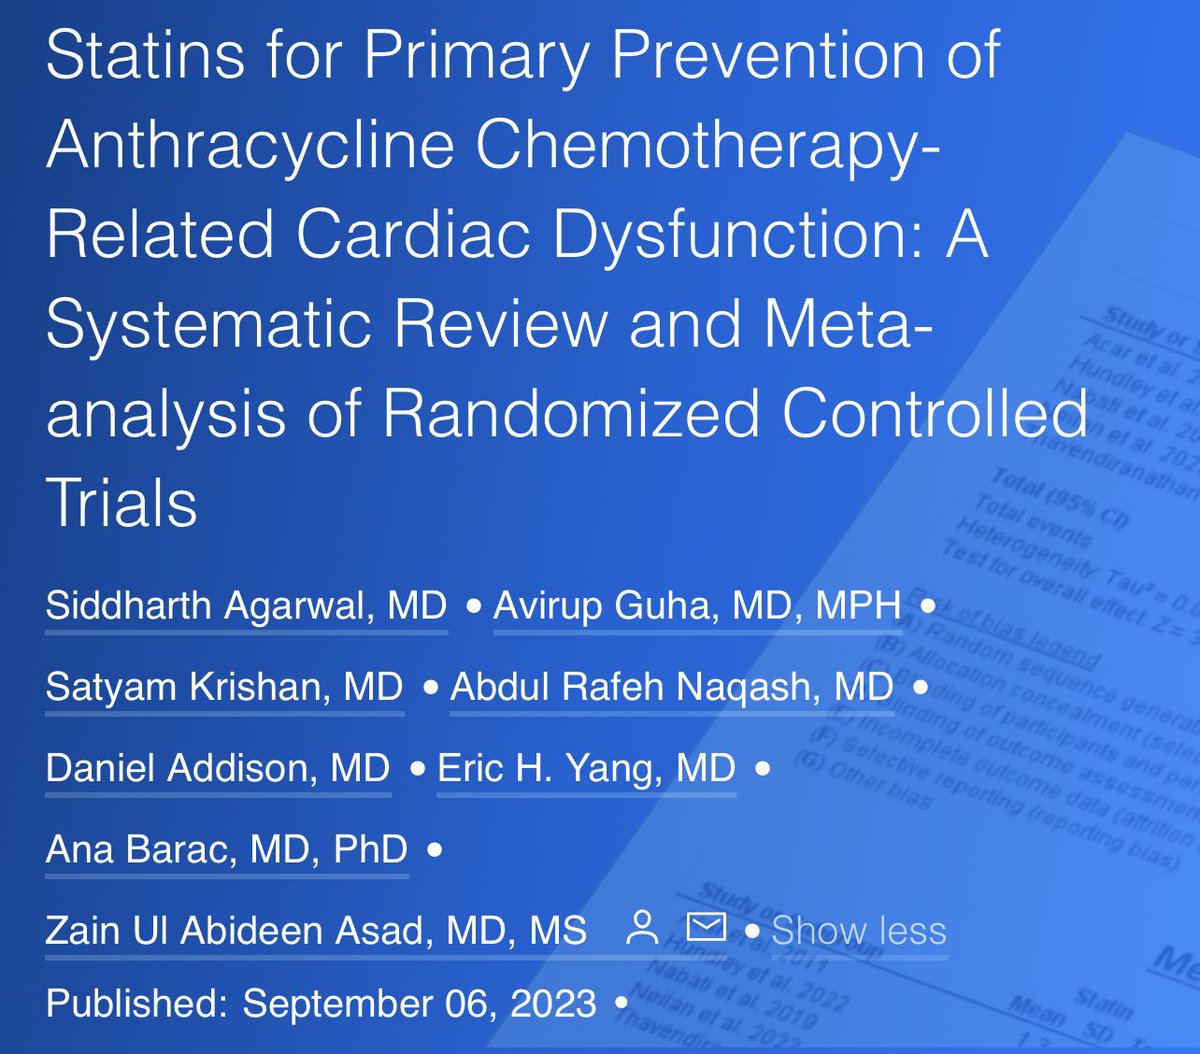 🚨🔥Excited to share our 📝 on 💊 Statins for the Prevention of Anthracycline Chemotherapy Related Cardiotoxicity💔
Extremely grateful to the guidance and mentorship of @ZainAsadEP @avirupguha @datsunian @thenasheffect @md_addison @AnaBaracCardio 
ajconline.org/article/S0002-…